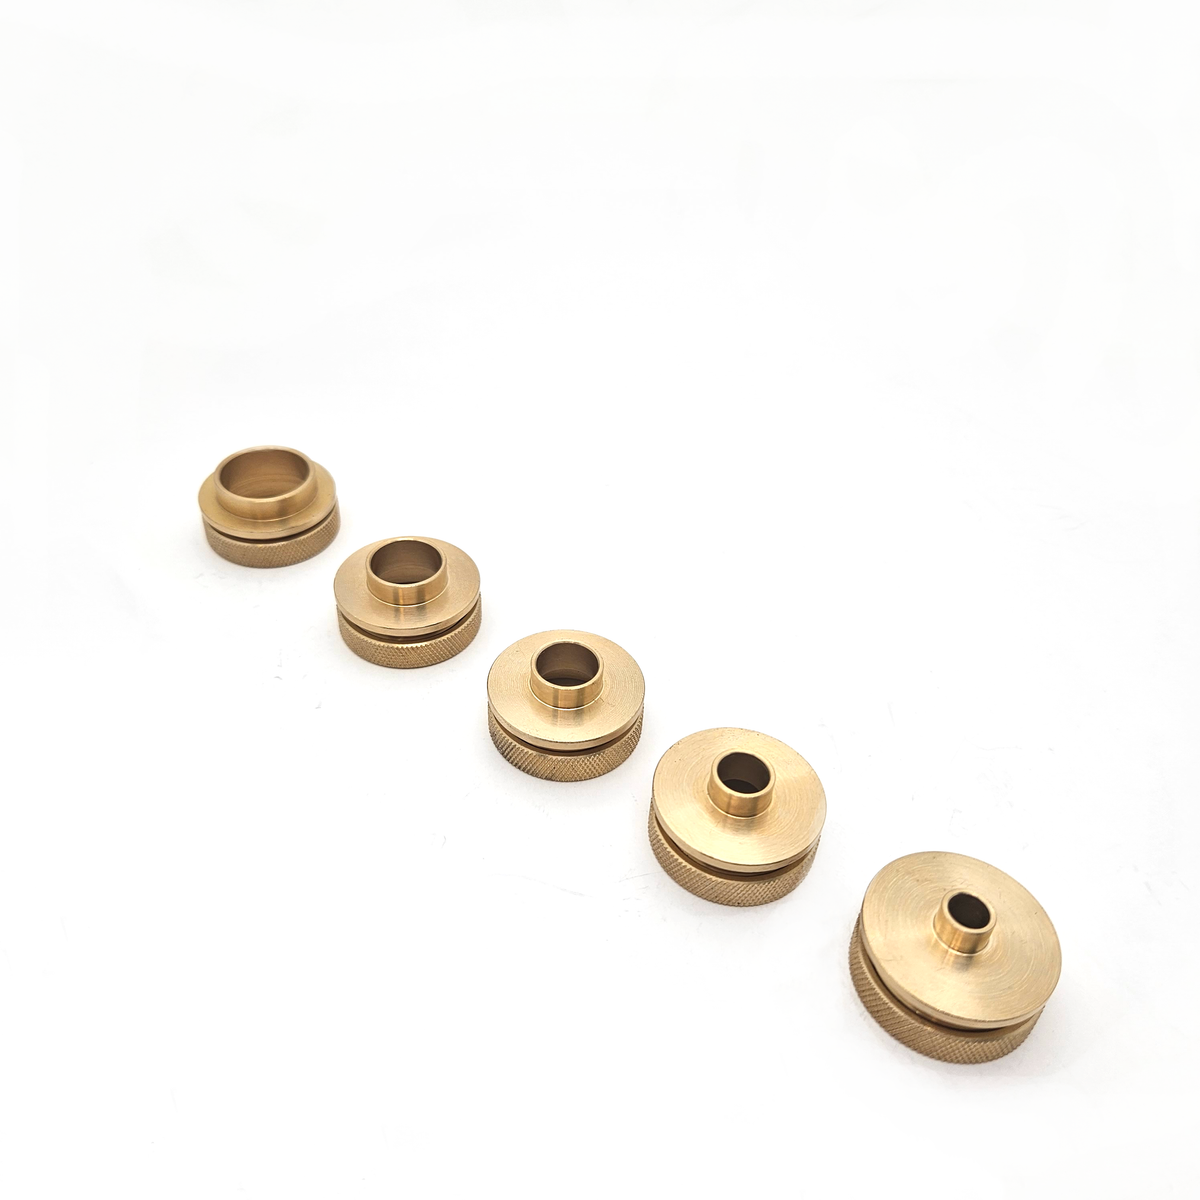 Template Guide, 11Pcs Brass Router Template Guides Bushing Set